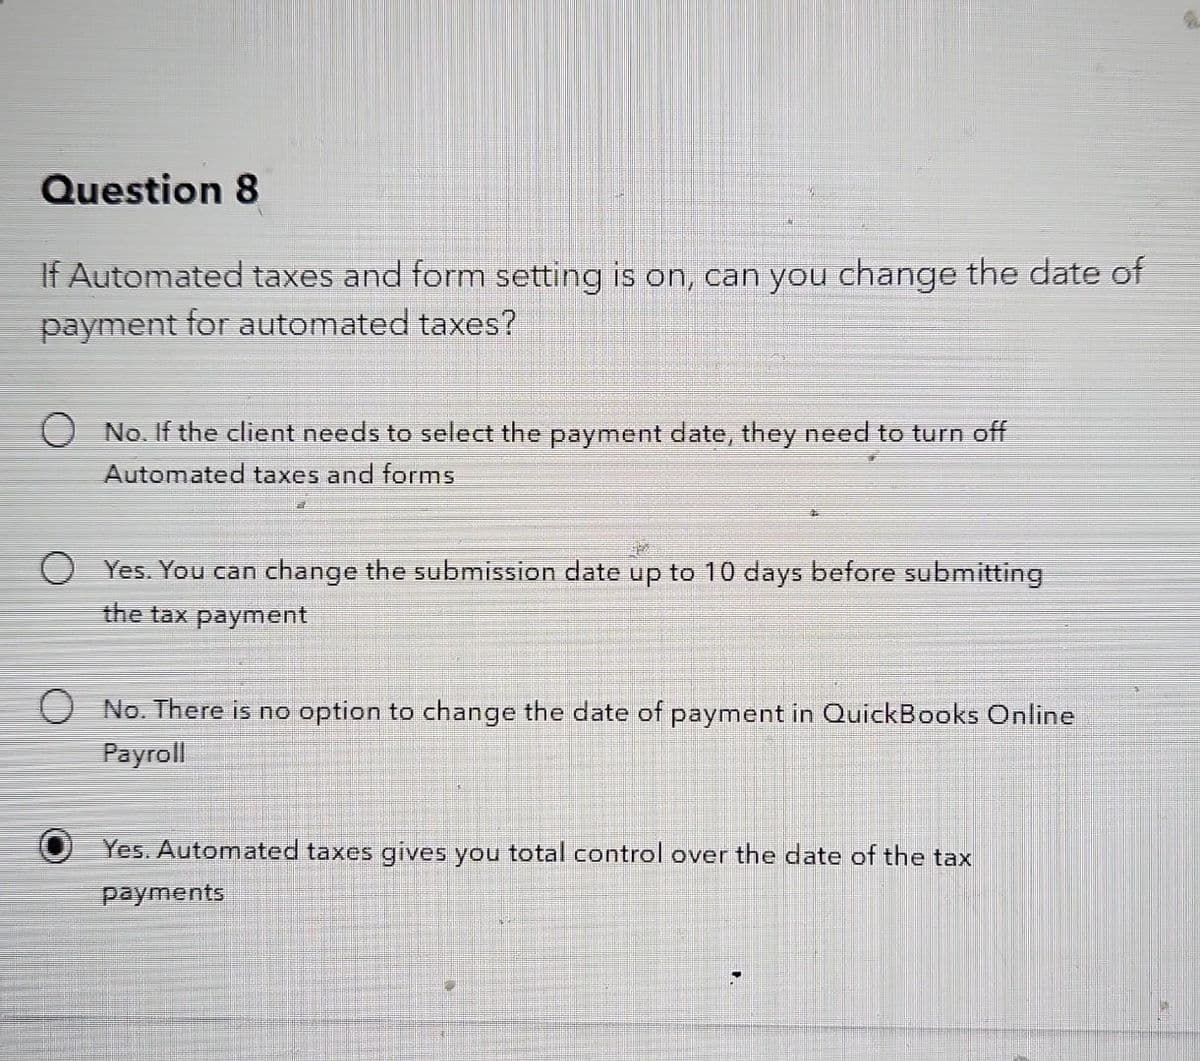 Question 8
If Automated taxes and form setting is on, can you change the date of
payment for automated taxes?
No. If the client needs to select the payment date, they need to turn off
Automated taxes and forms
Yes. You can change the submission date up to 10 days before submitting
the tax payment
No. There is no option to change the date of payment in QuickBooks Online
Payroll
Yes. Automated taxes gives you total control over the date of the tax
payments